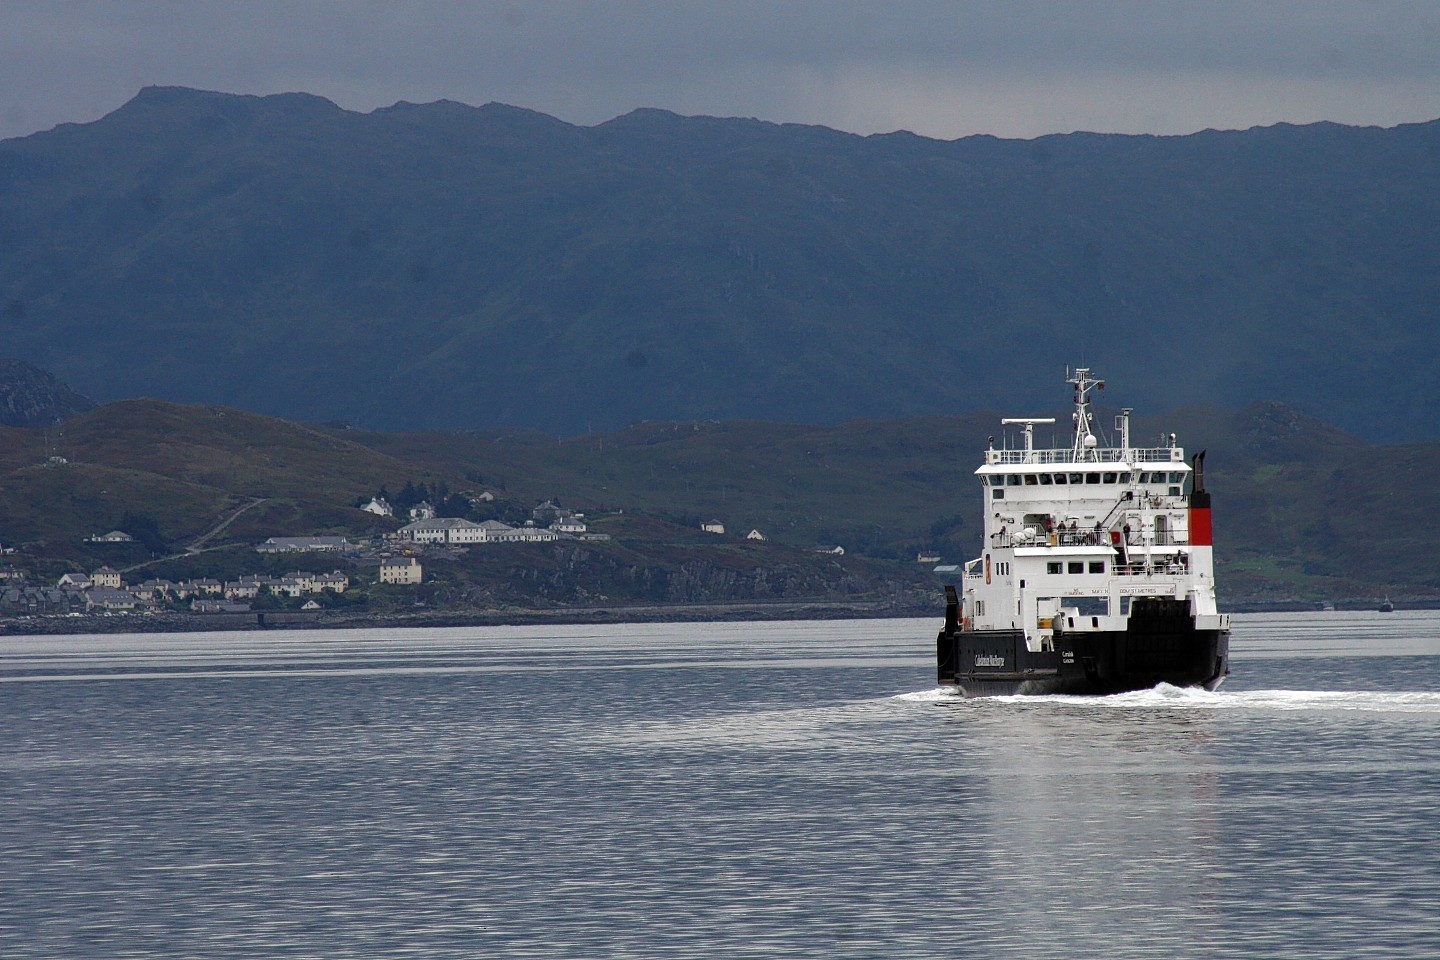 The service is operated by CalMac